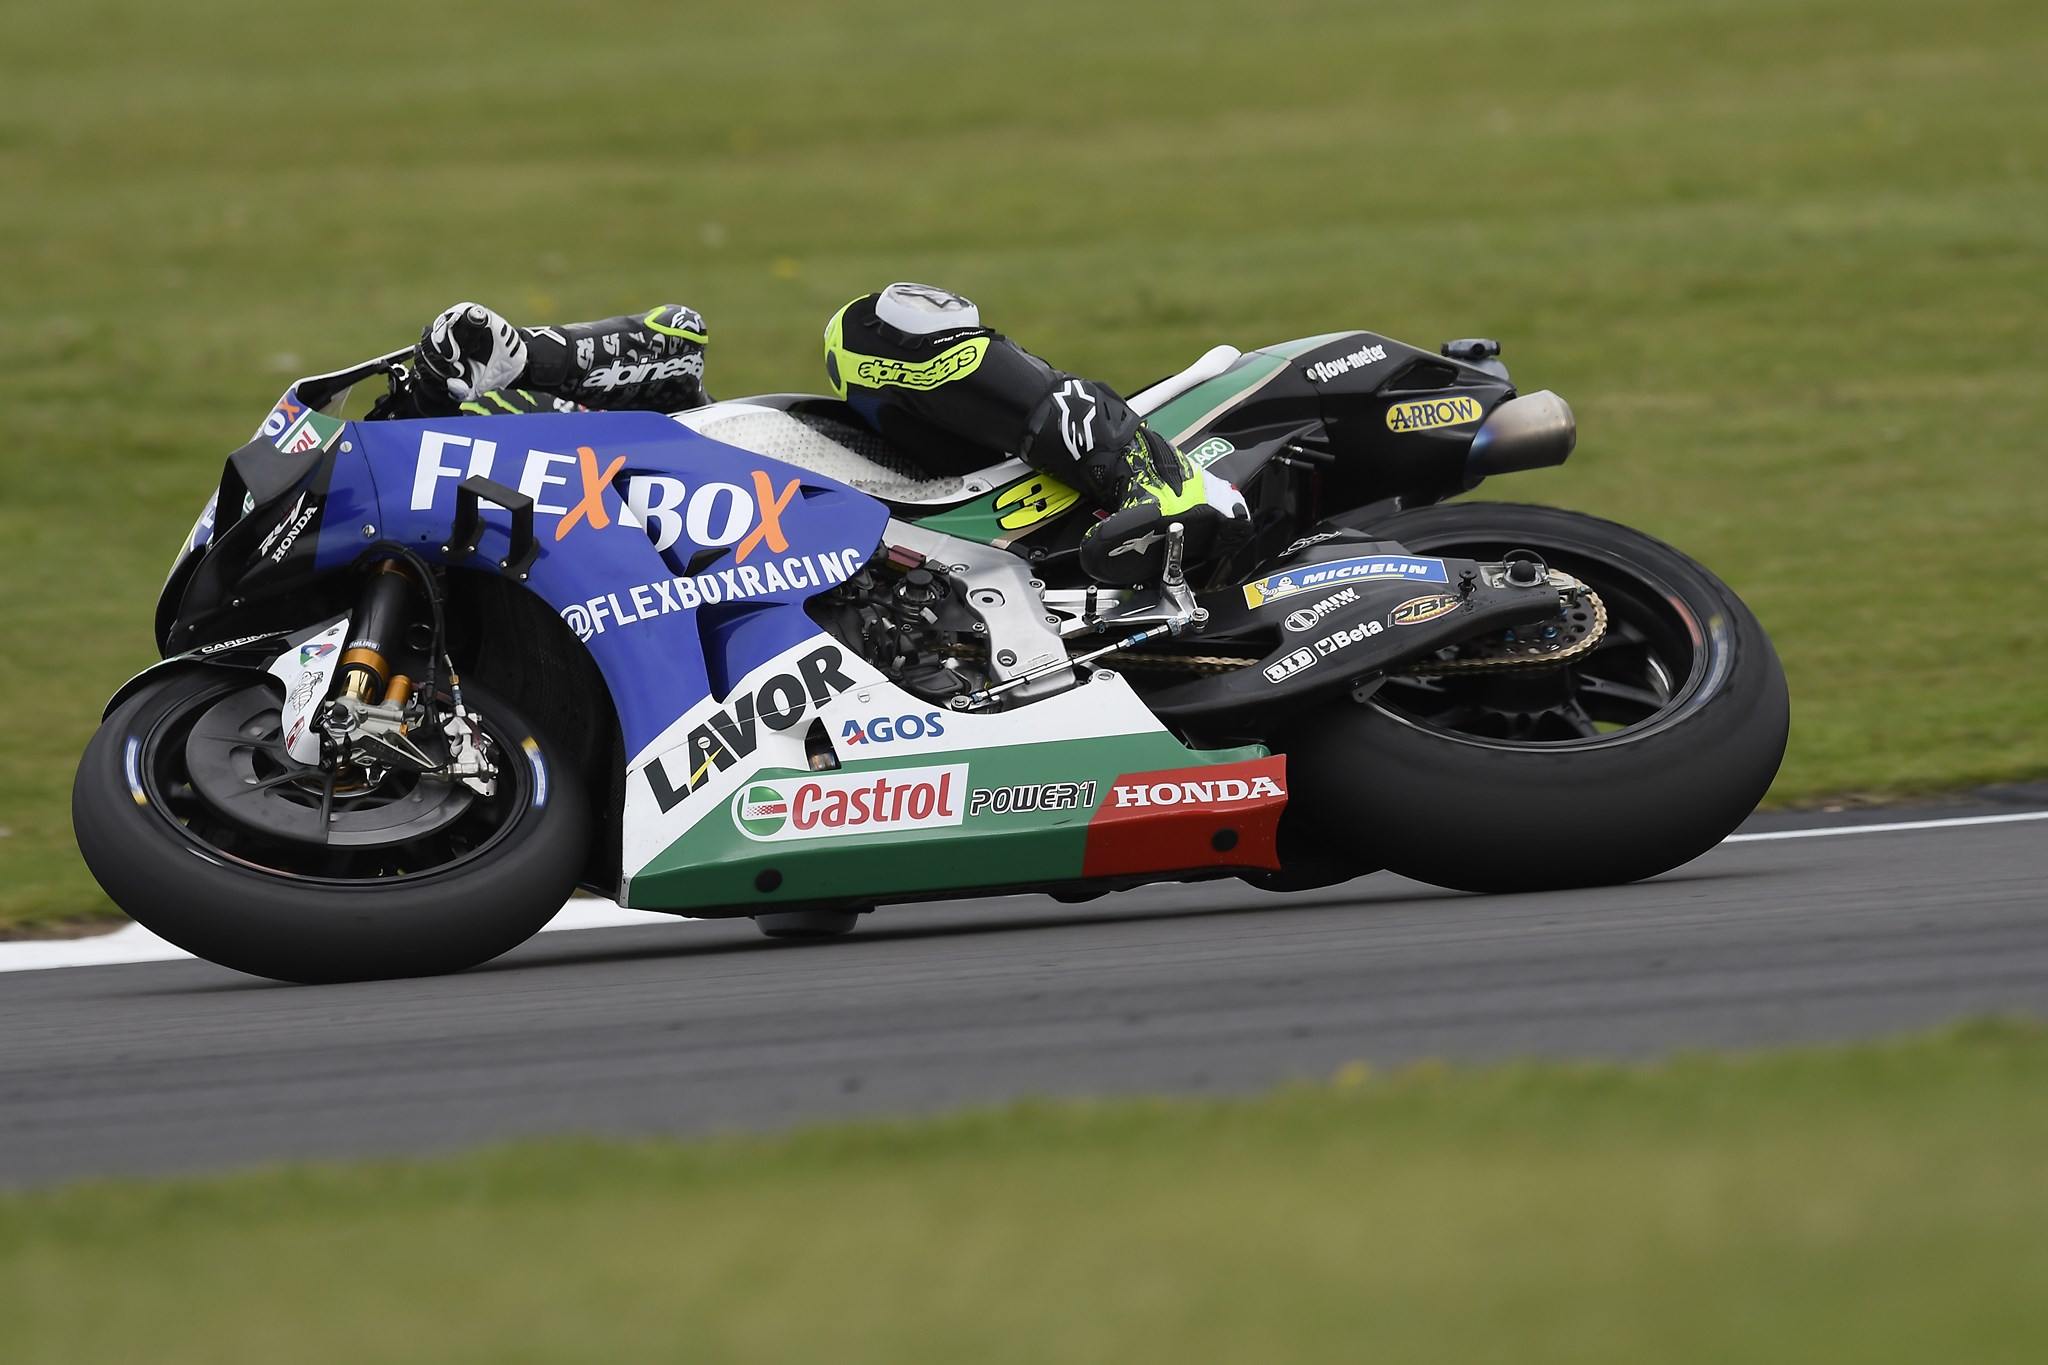 Crutchlow in the mix at home race